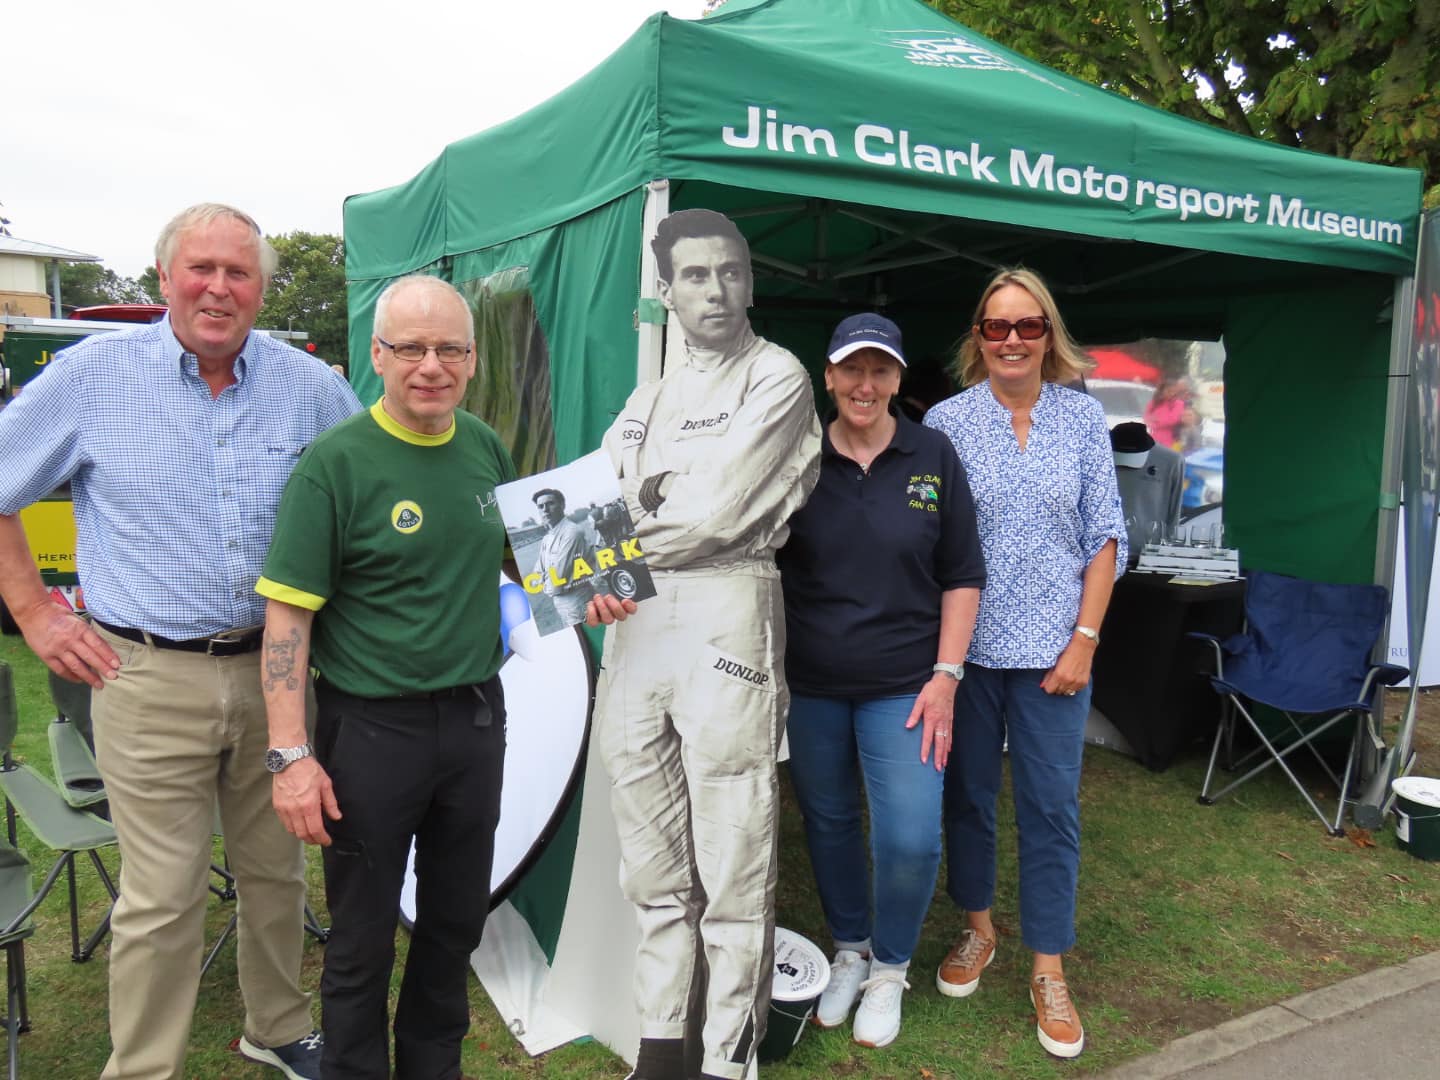 Some real motor racing history at Southport Classic & Speed 2022 at Victoria Park where they were celebrating British motor racing legend Jim Clark, who won the Indy 500 and 25 Grand Prix - including one at Aintree 60 years ago, in 1962. Here is Jims nephew, Ian Calder, with the 1962 trophy, plus Jim Clark Trust trustee Lawrence Johnston, Marion Phillips, and Alison Calder. Photo by Andrew Brown Media